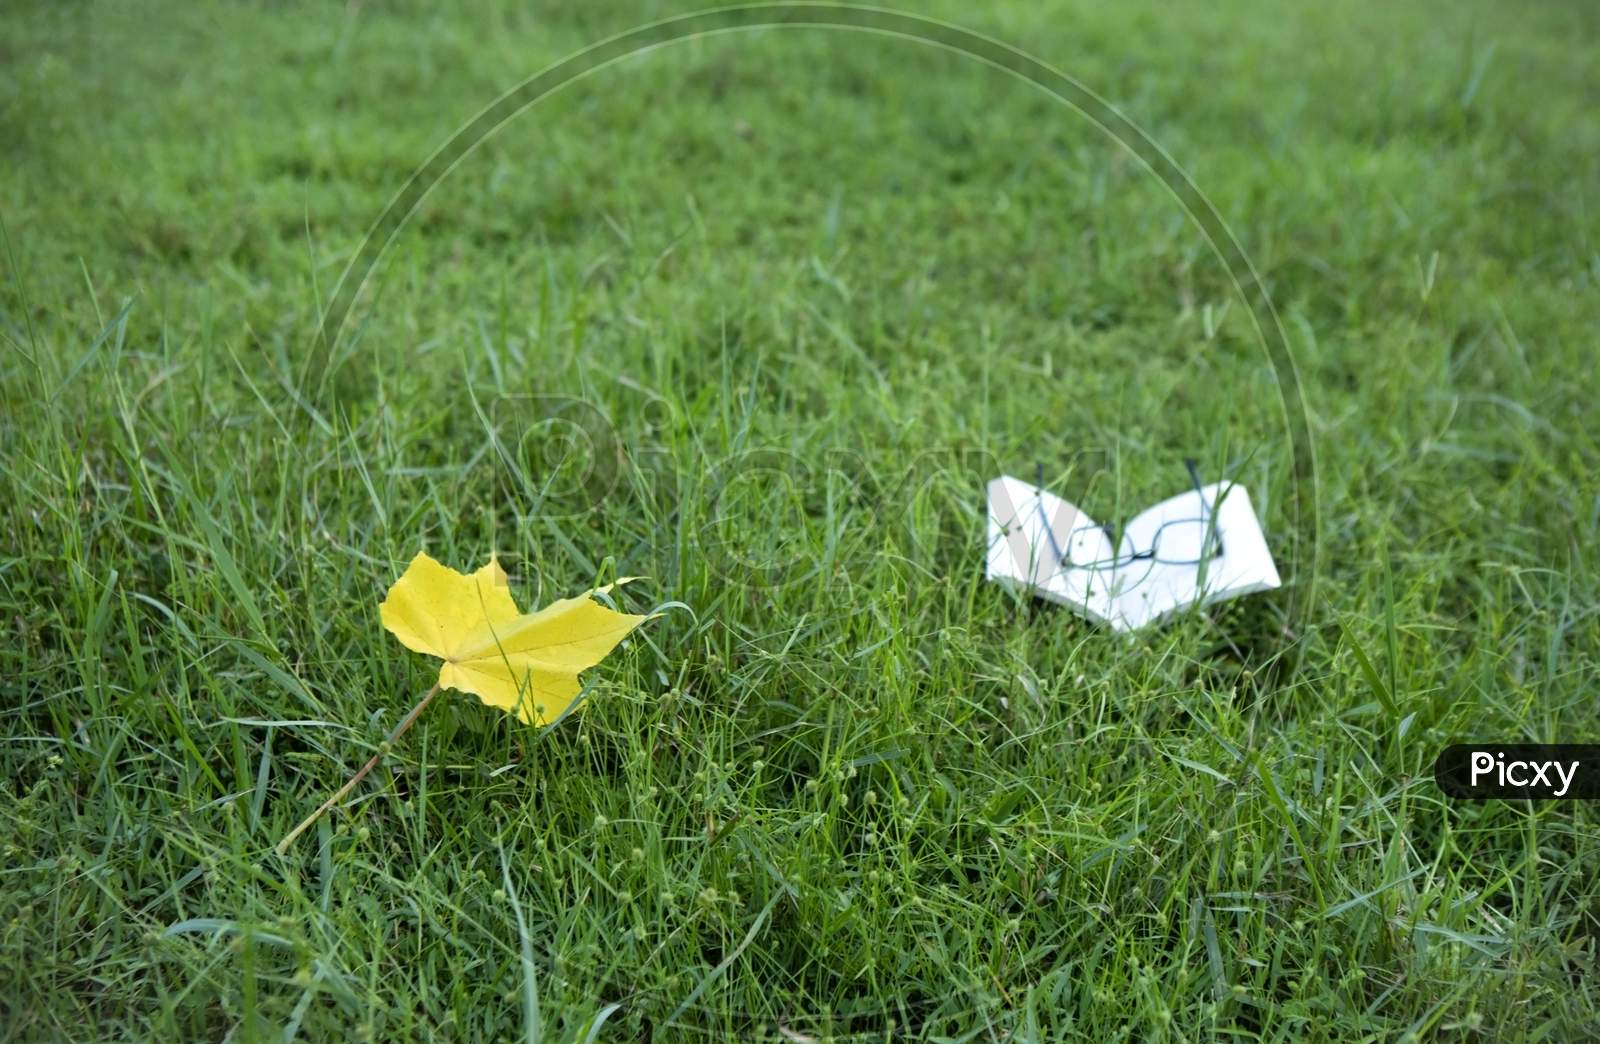 A Yellow Leaf And A Open Story Book With A Spectacle On It On Green Grass Bed In A Park